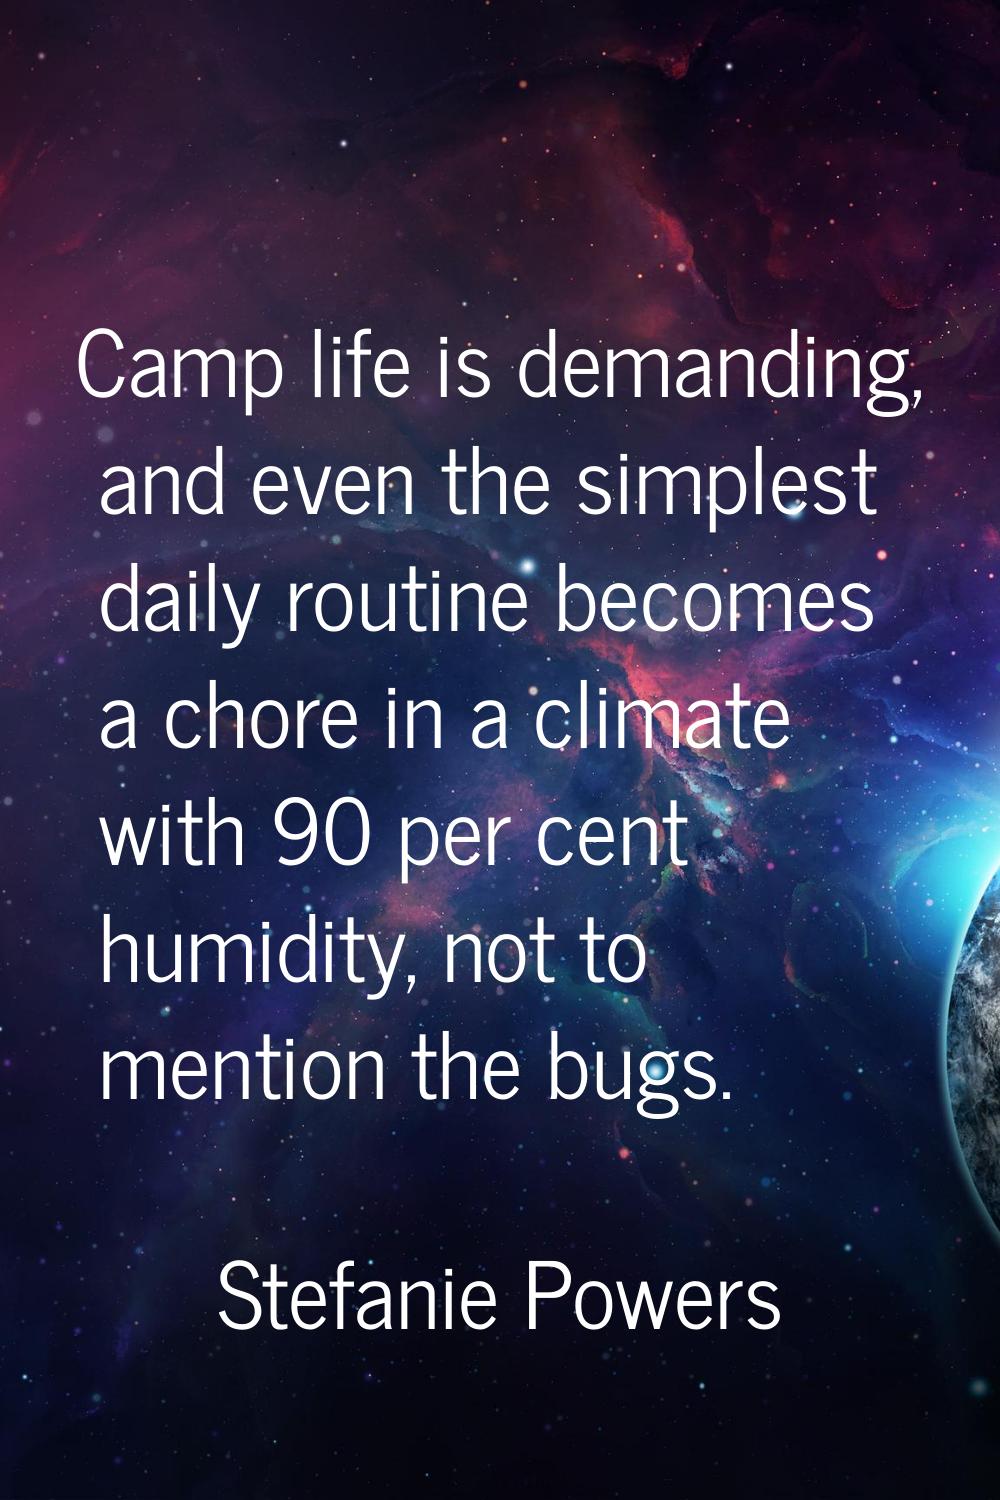 Camp life is demanding, and even the simplest daily routine becomes a chore in a climate with 90 pe